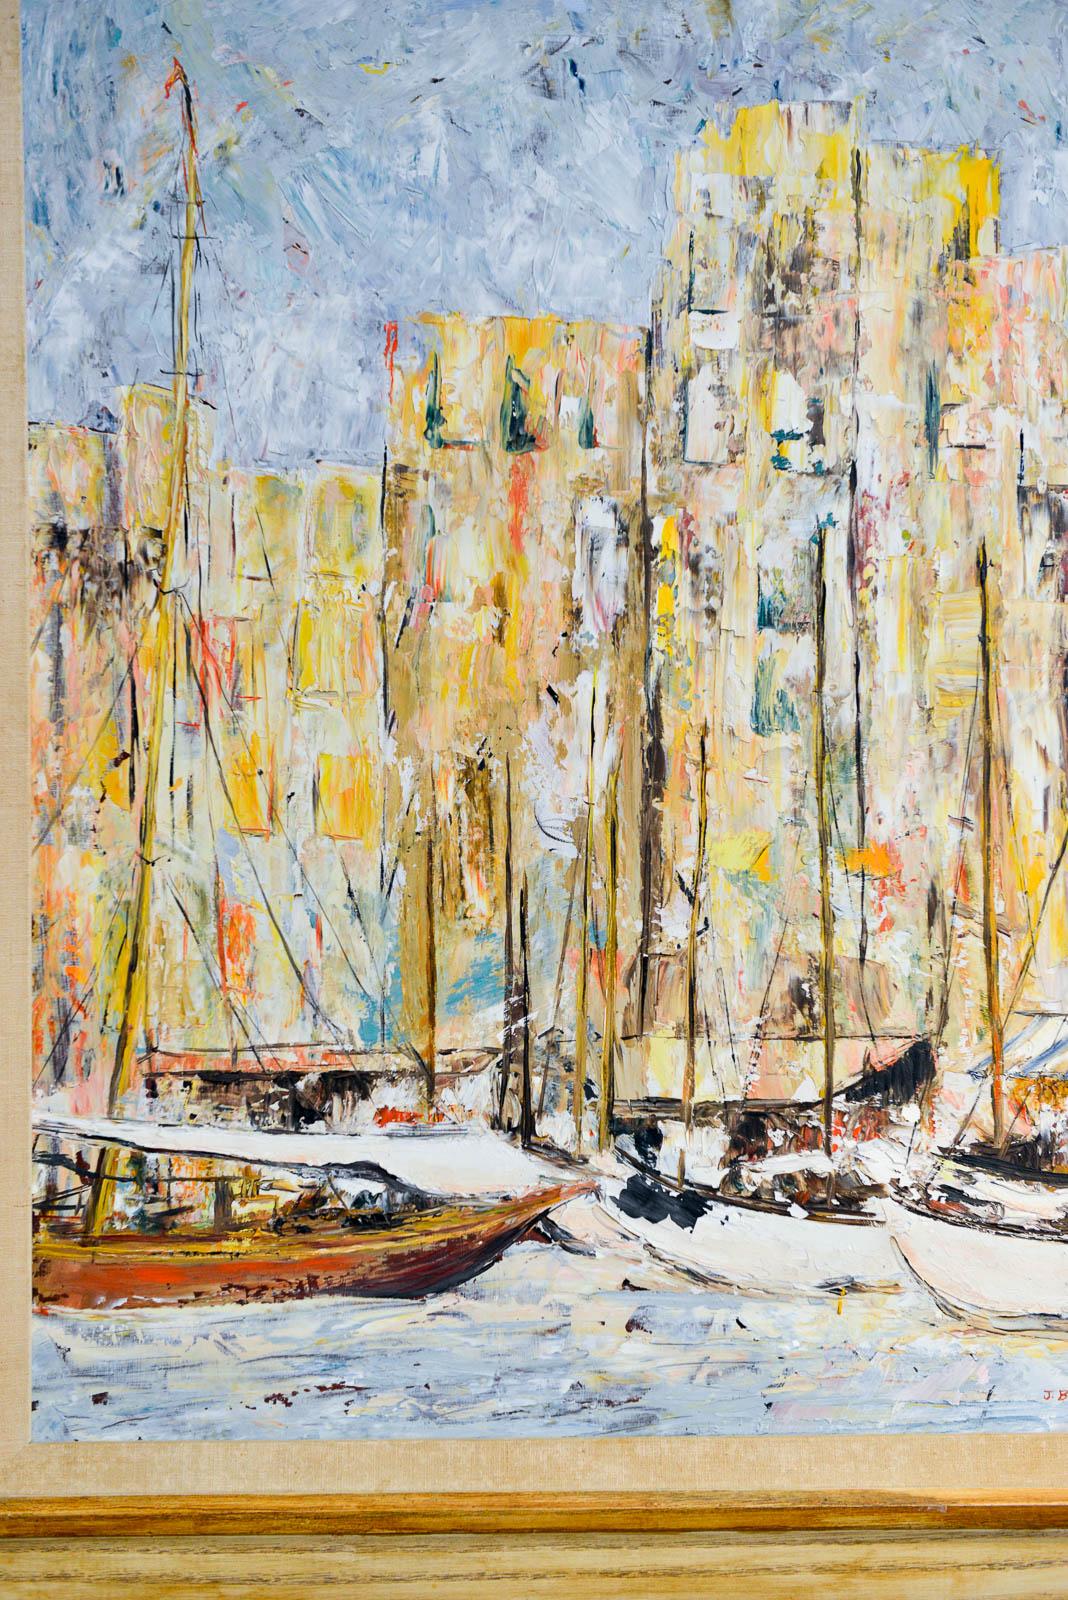 Nautical painting by J. Bogenreif, 1963. Original acrylic on masonite with matted and wood frame depicting sailboats. Measures 30